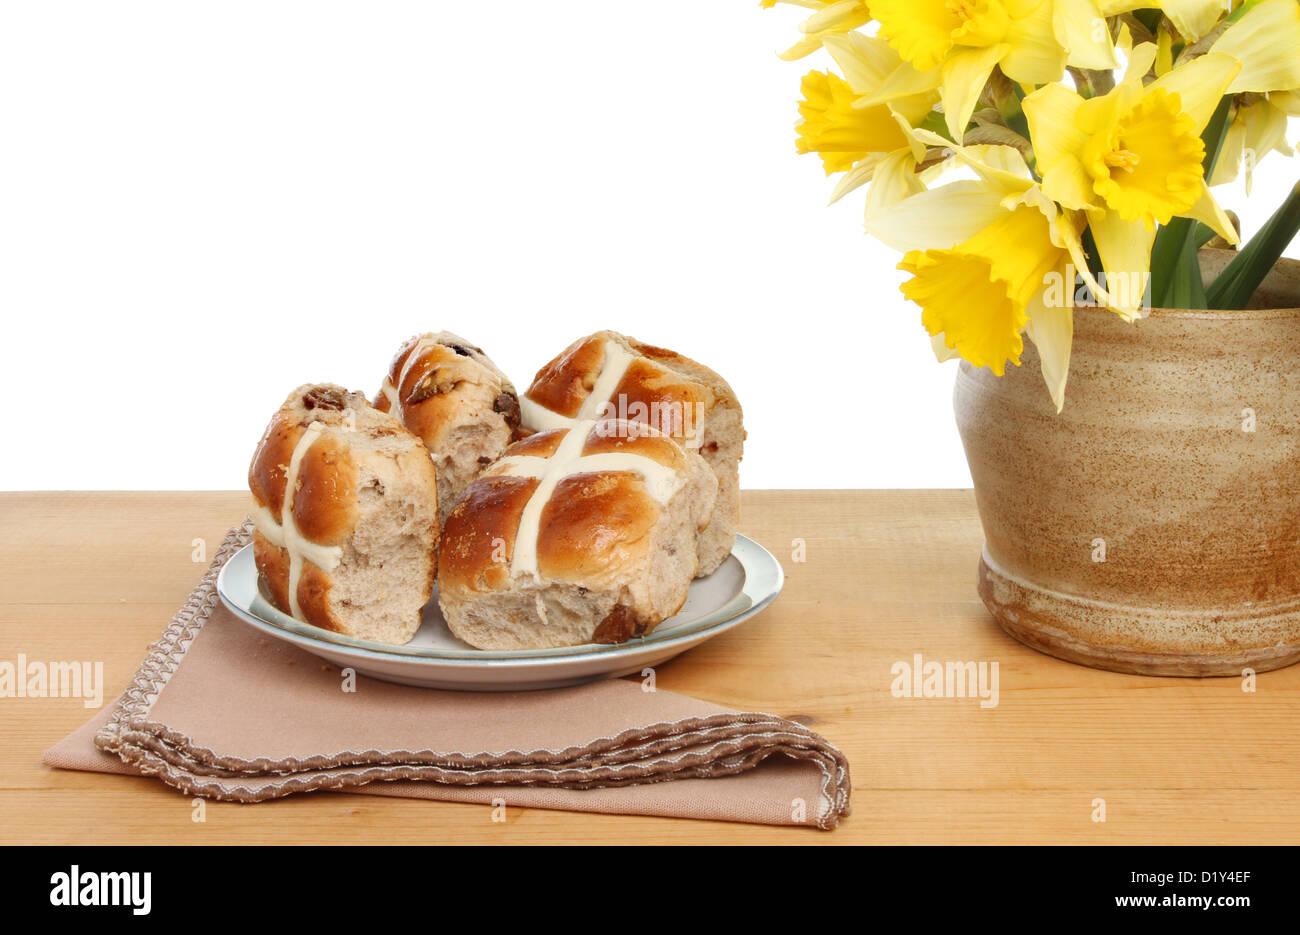 Easter theme, hot cross buns with daffodil flowers on a wooden table Stock Photo